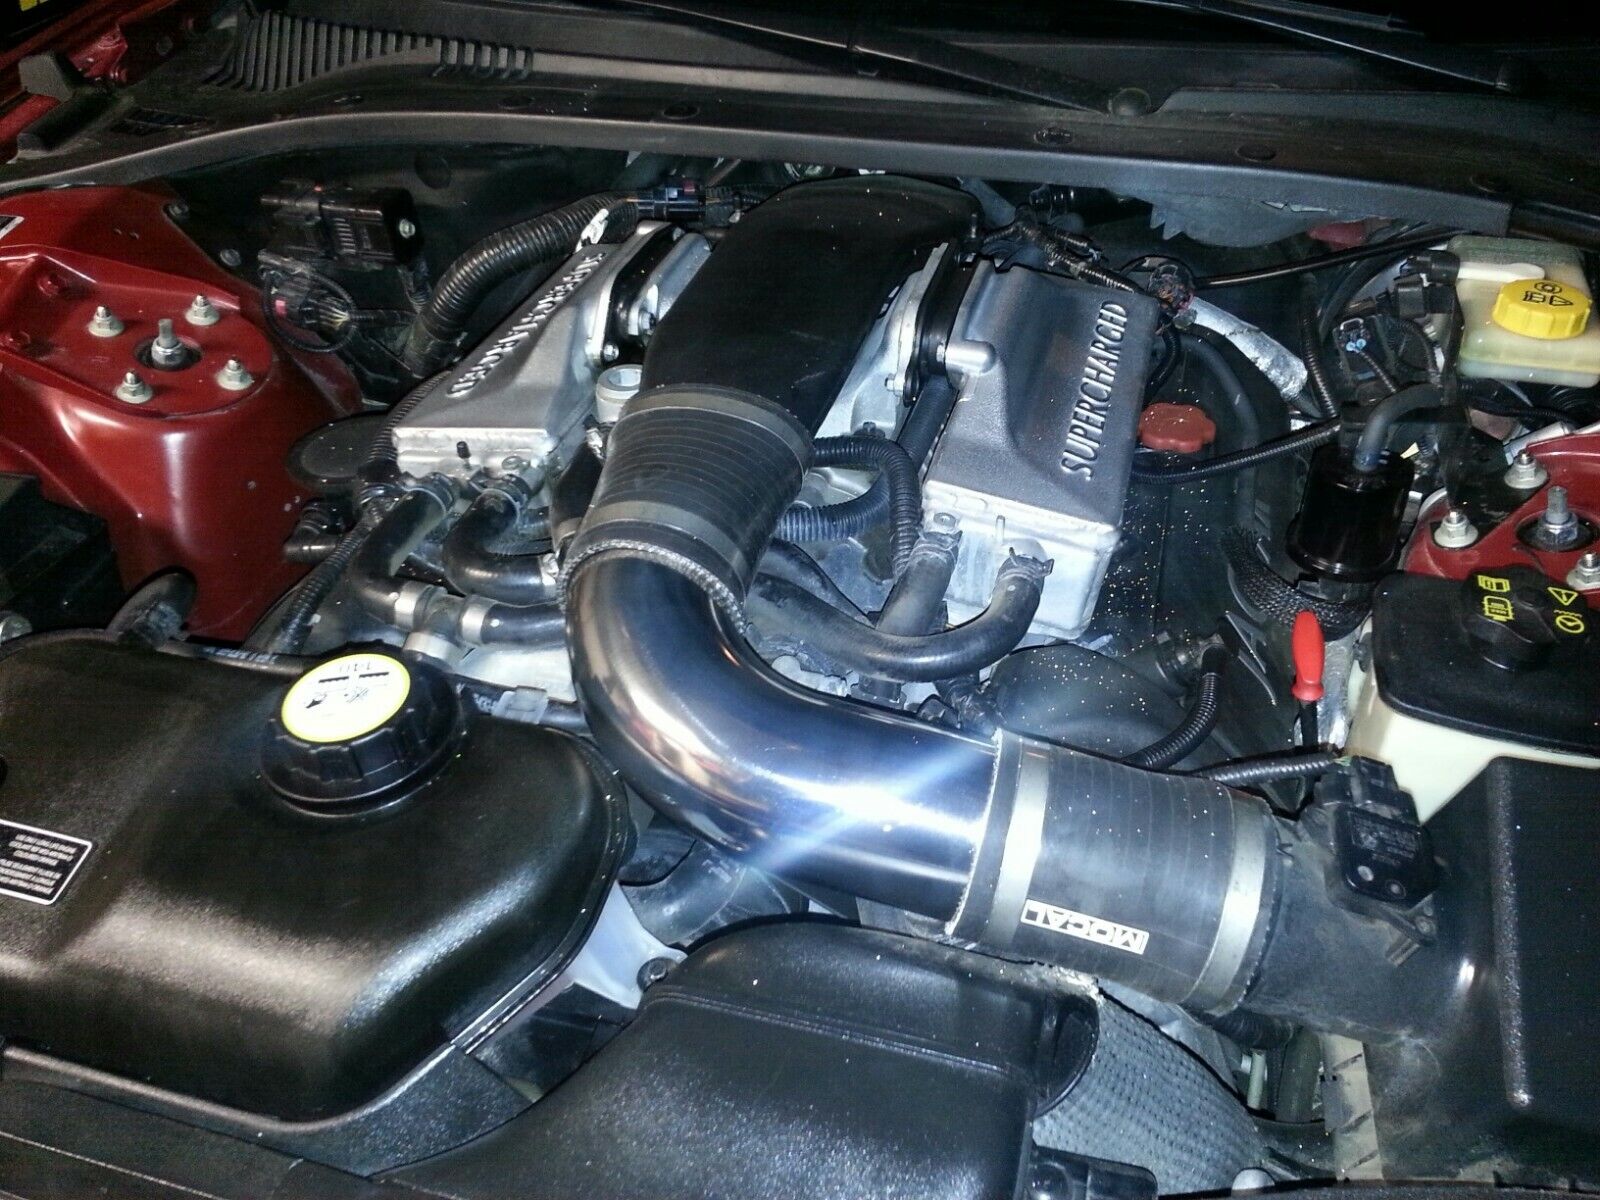 Jaguar XJR/S Type R 4.2 Supercharged Performance 'Caldoofy' Stage 1 Intake 